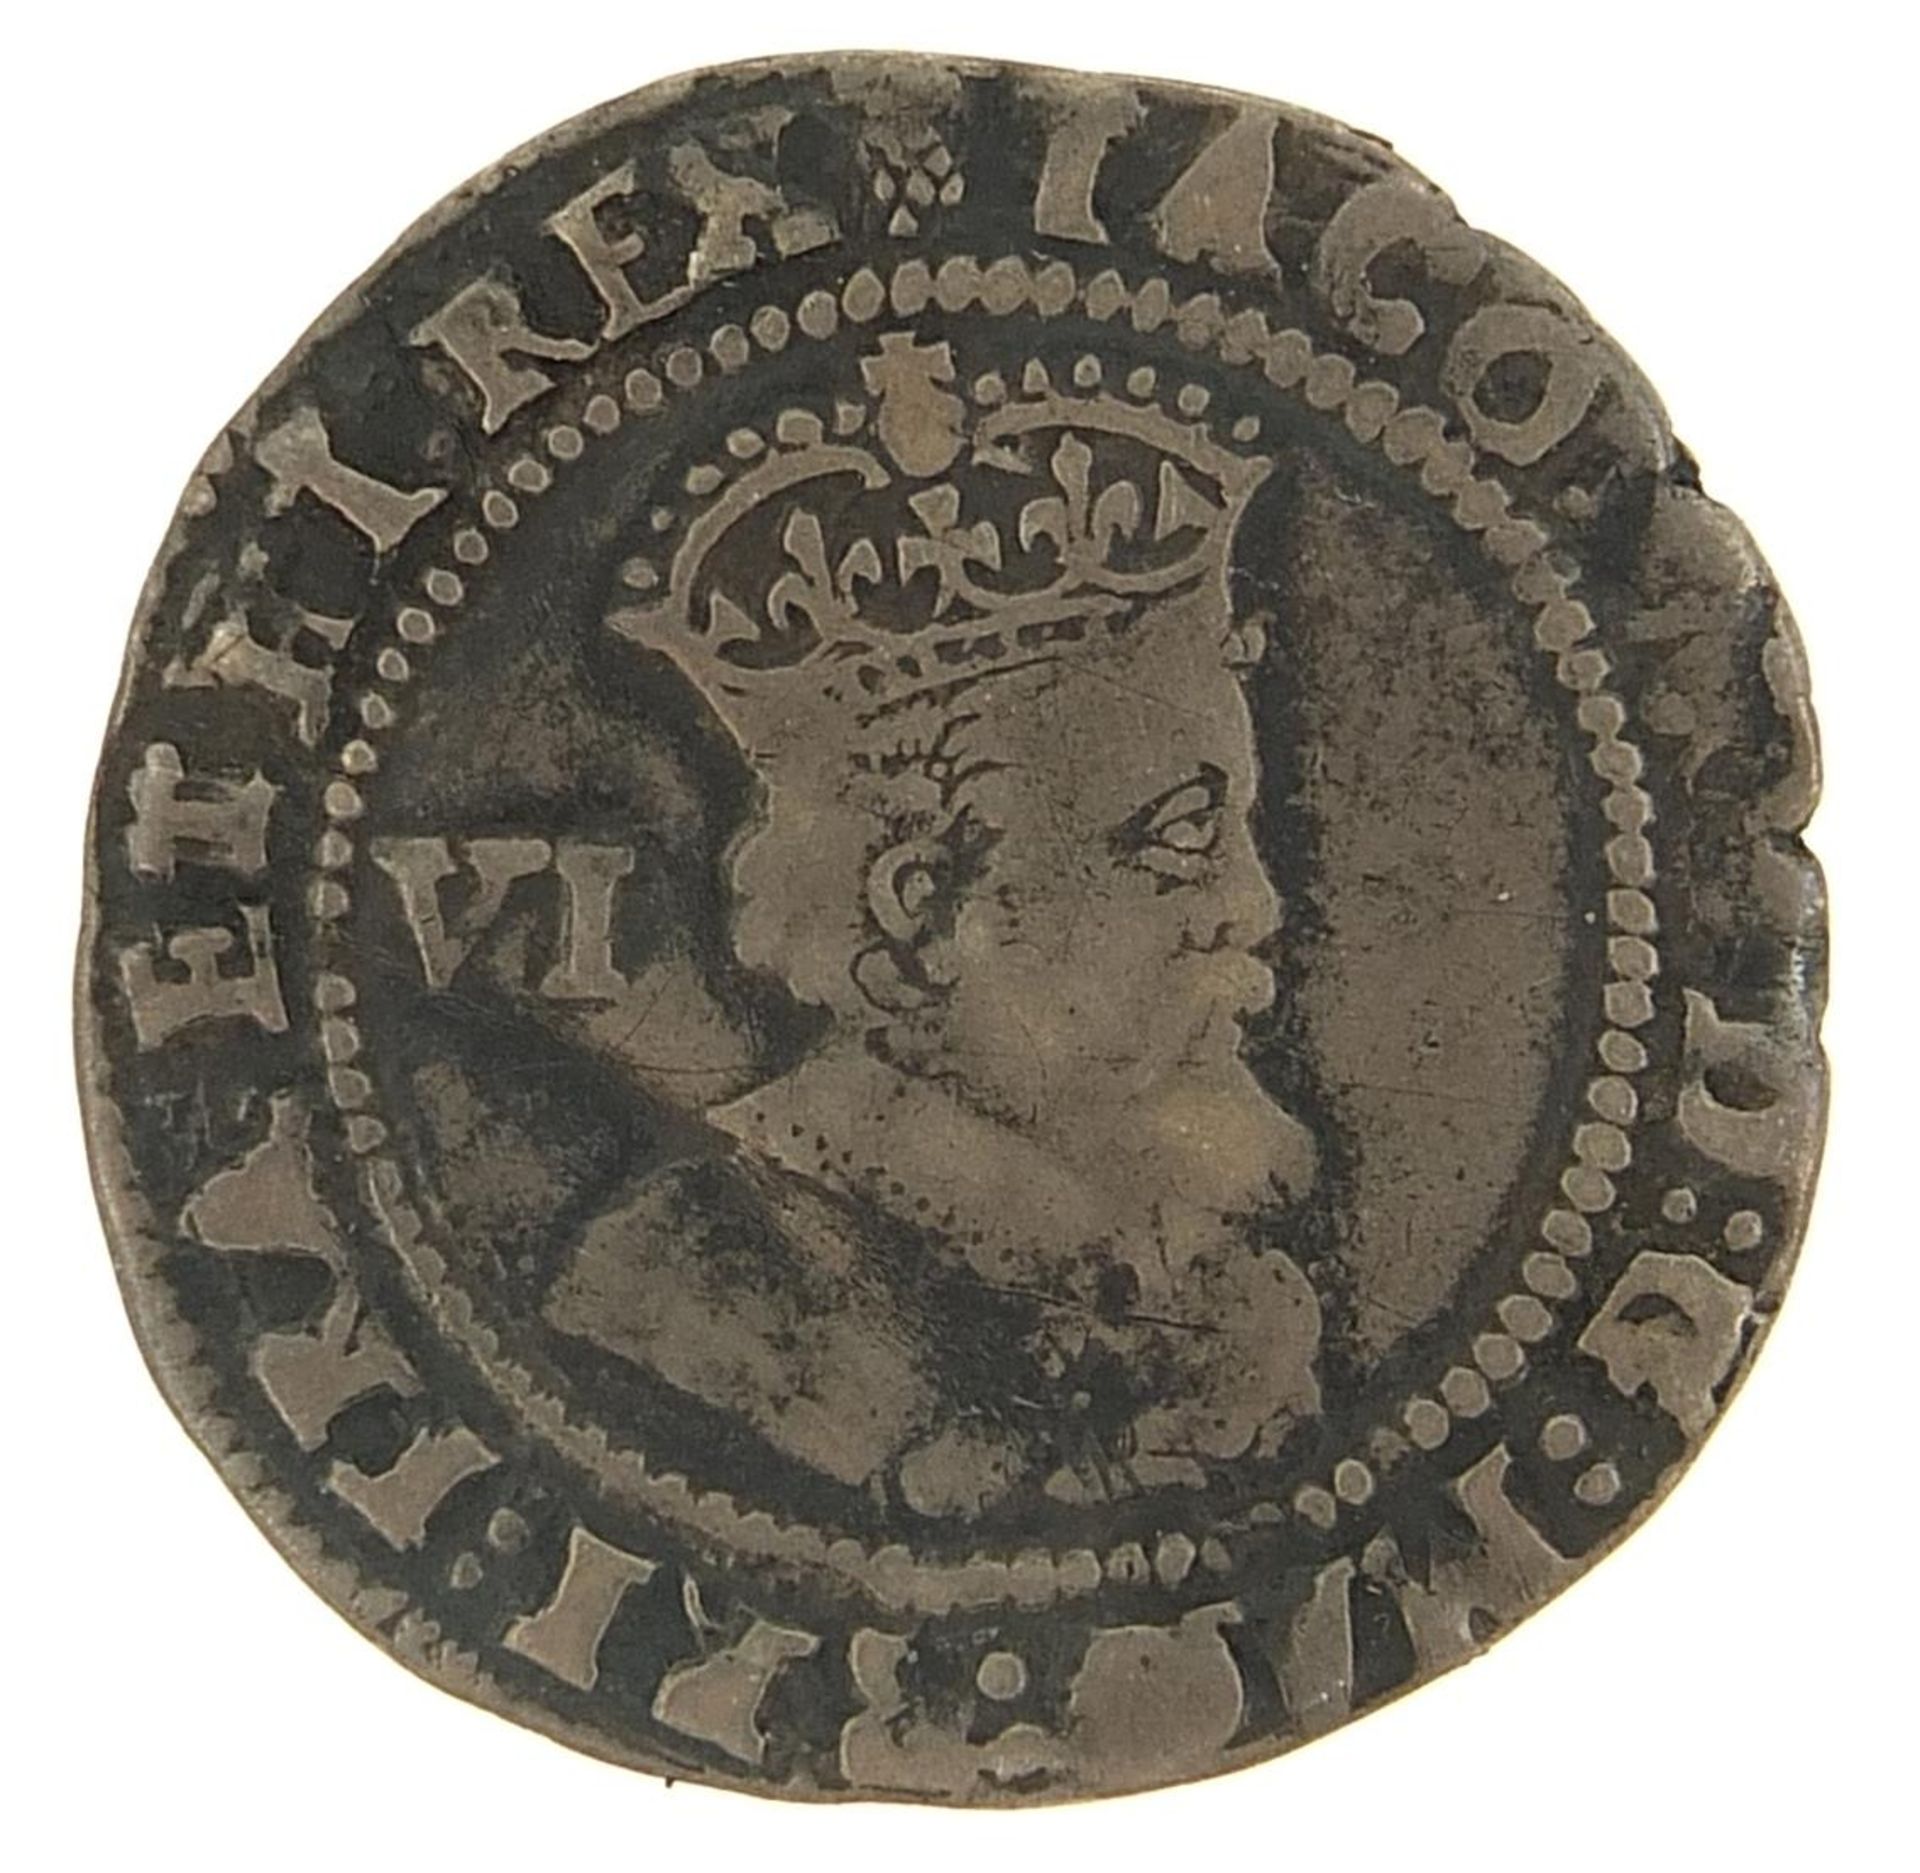 James I hammered silver sixpence, second bust